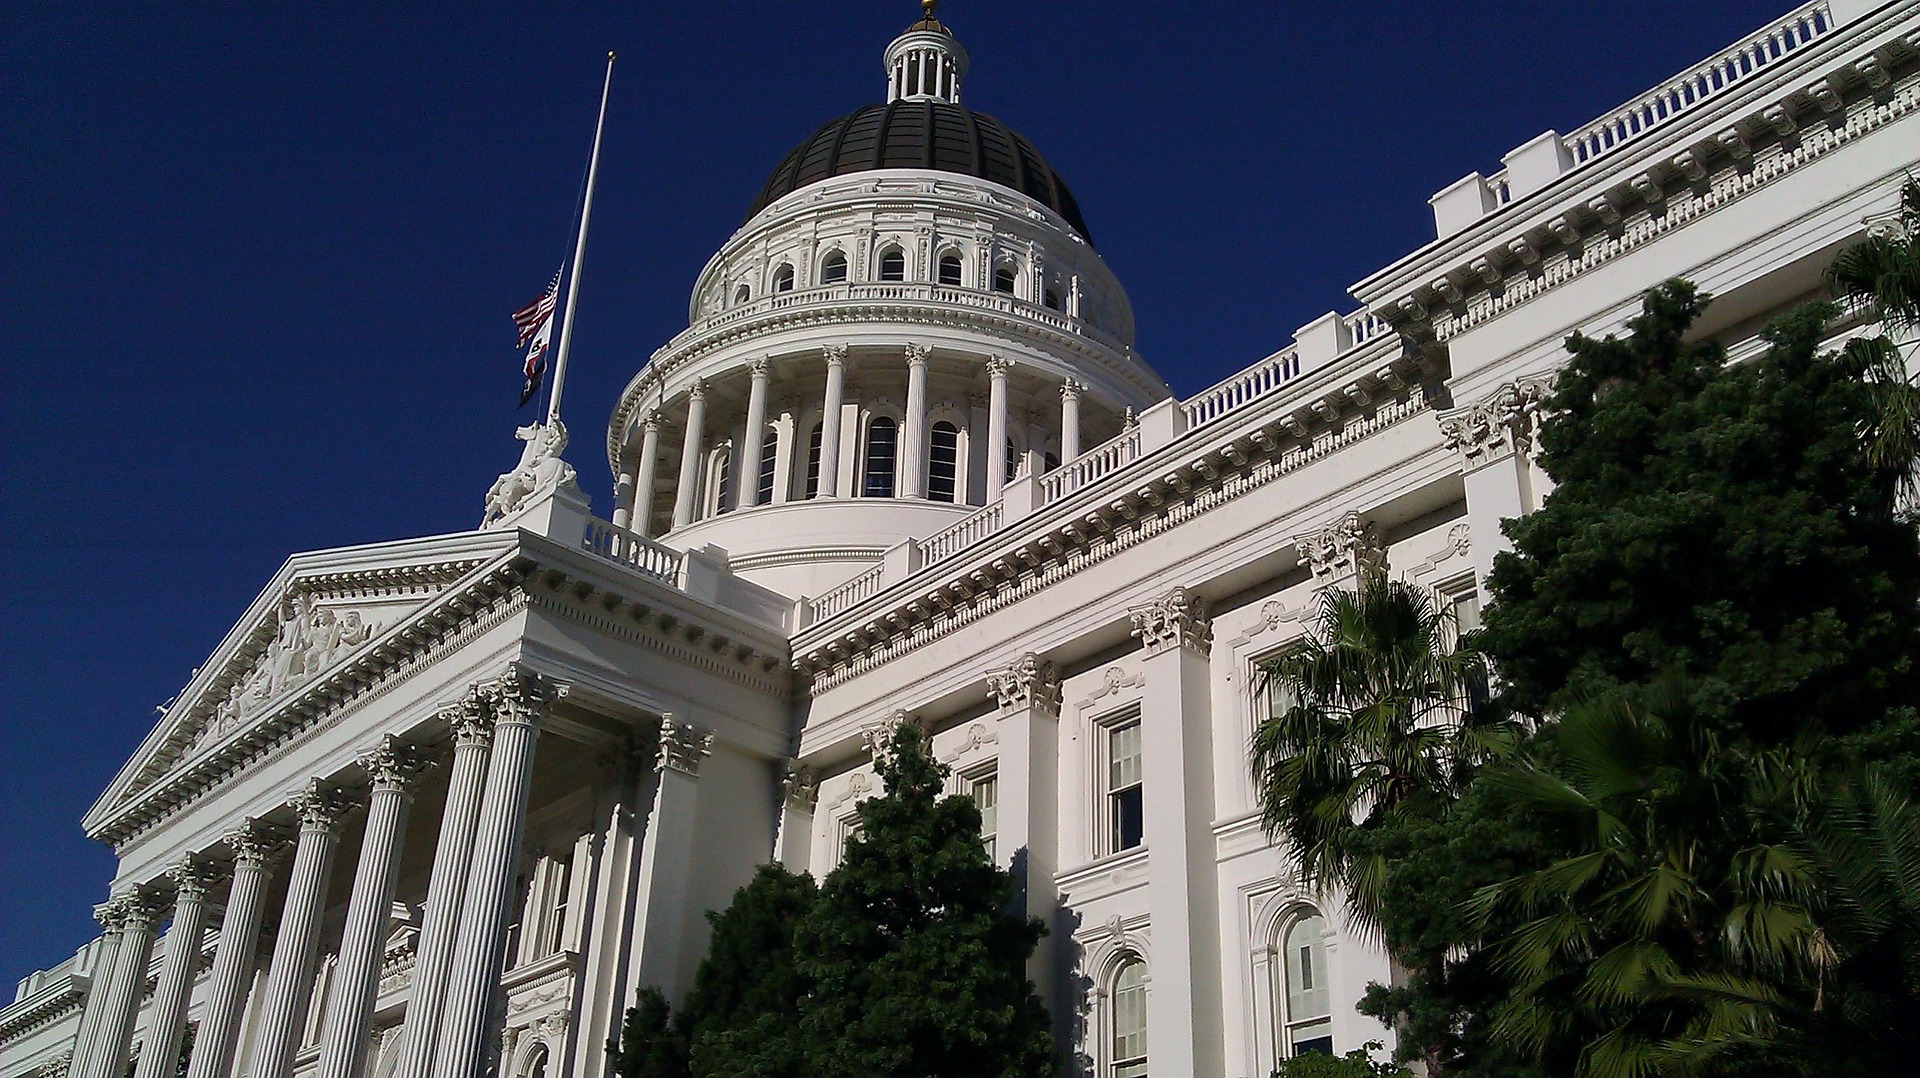 Jobs at the state capital in Sacramento CA